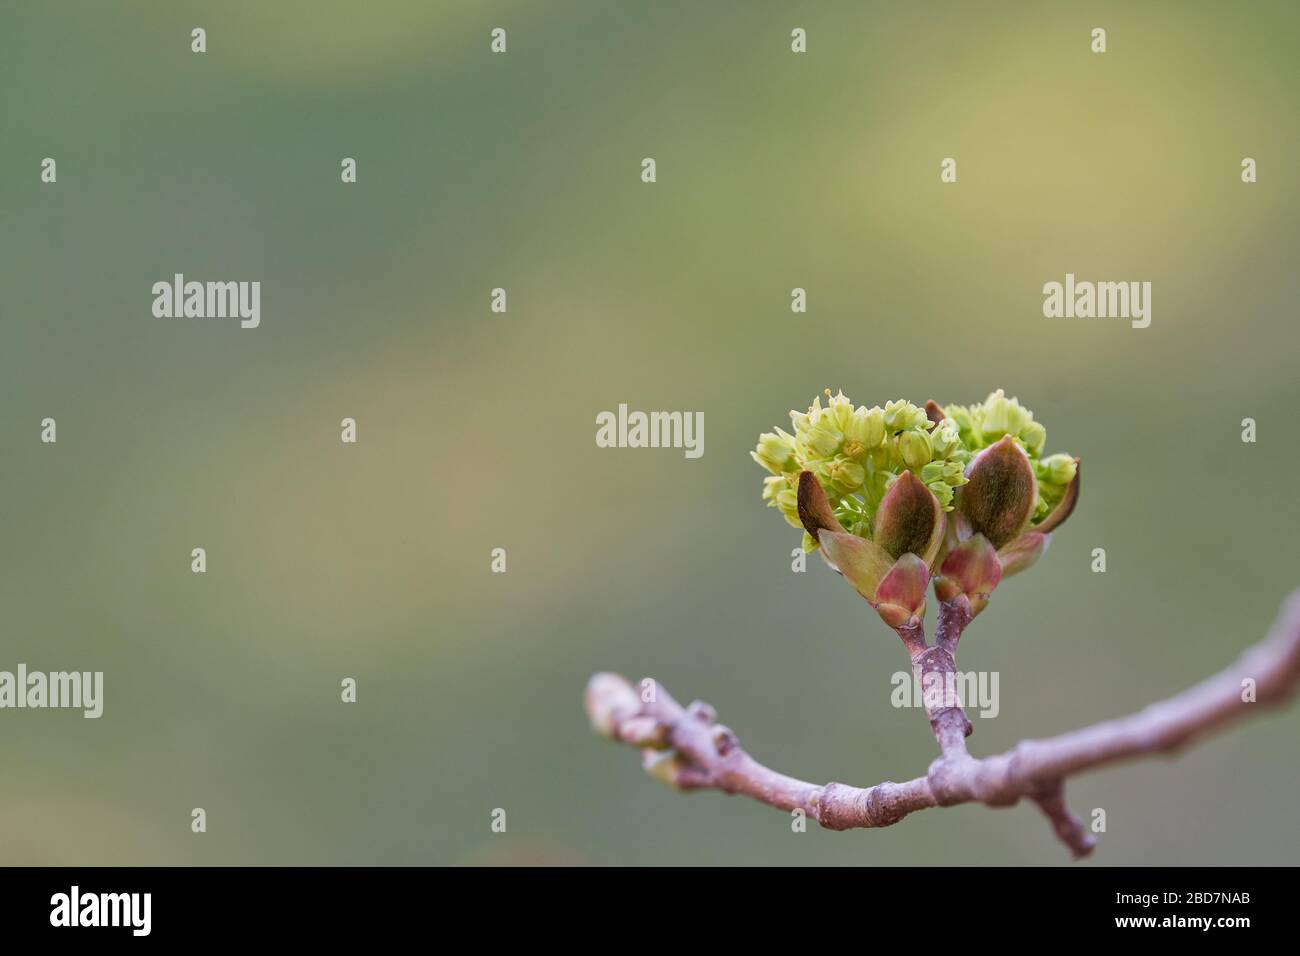 Linden (Tilia tomentosa) blossoms backlit on a pastel background with copy space. Concept for spring and tree blooming, alternative medicine and gemmo Stock Photo